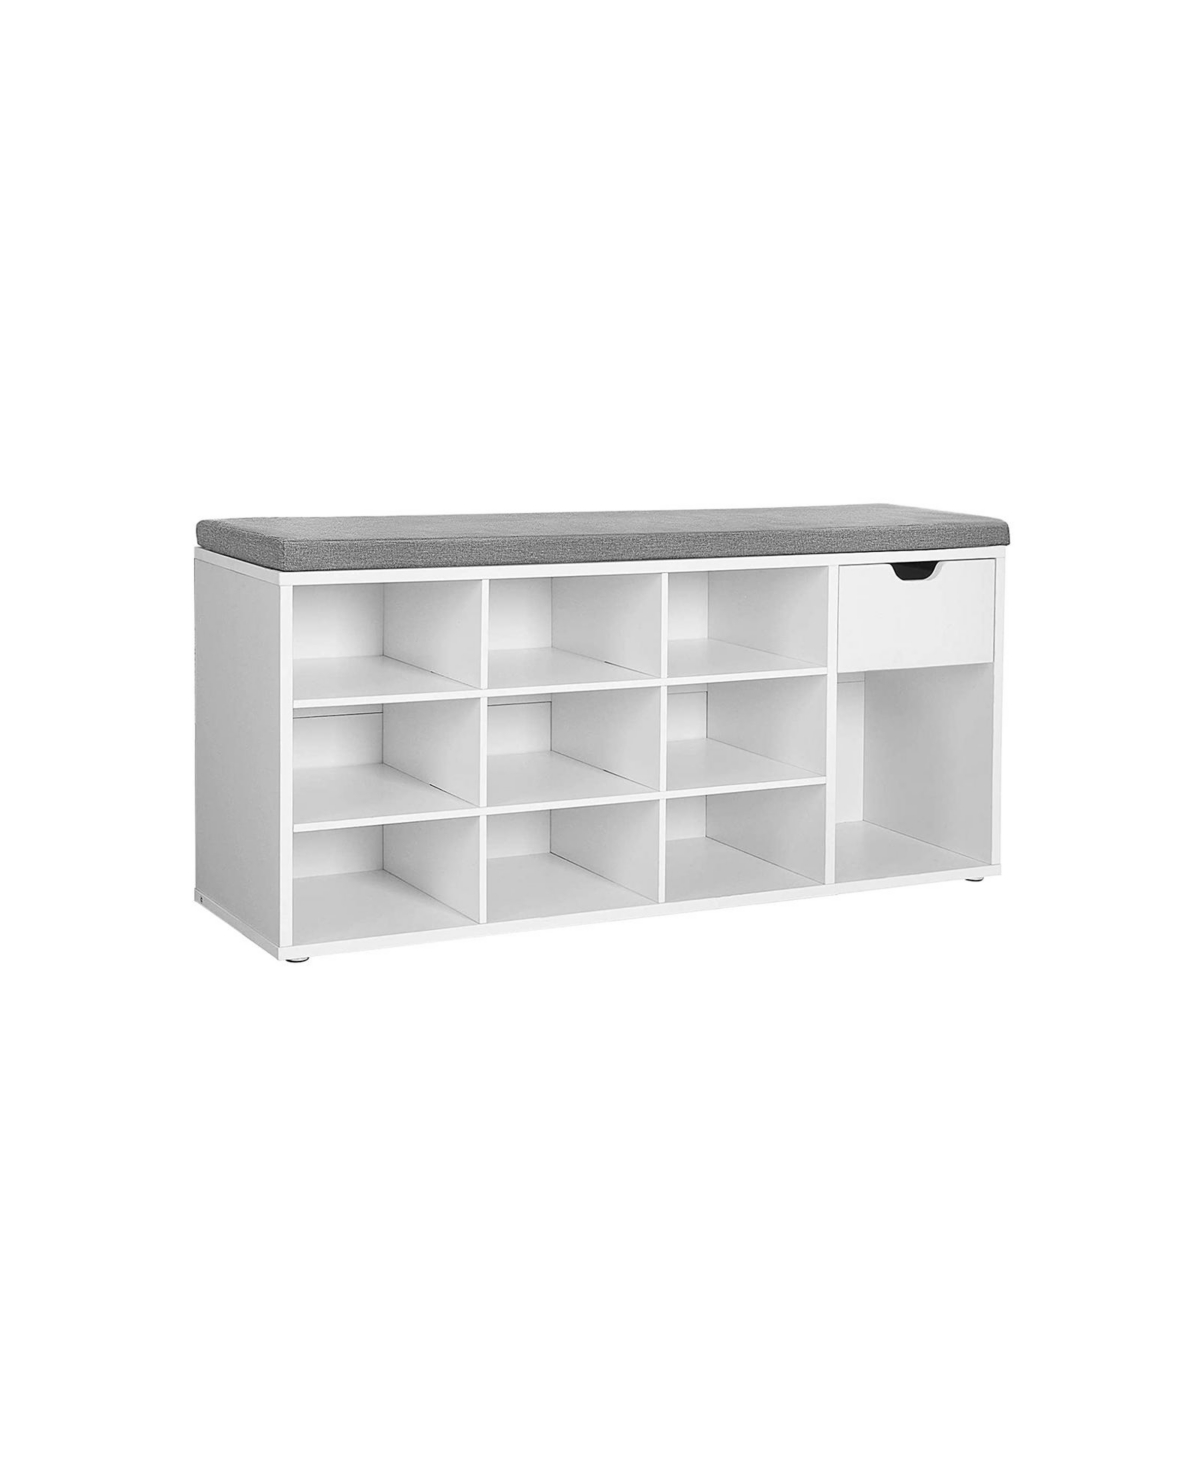 Cubbie Shoe Cabinet Storage Bench with Cushion, Adjustable Shelves, White - White